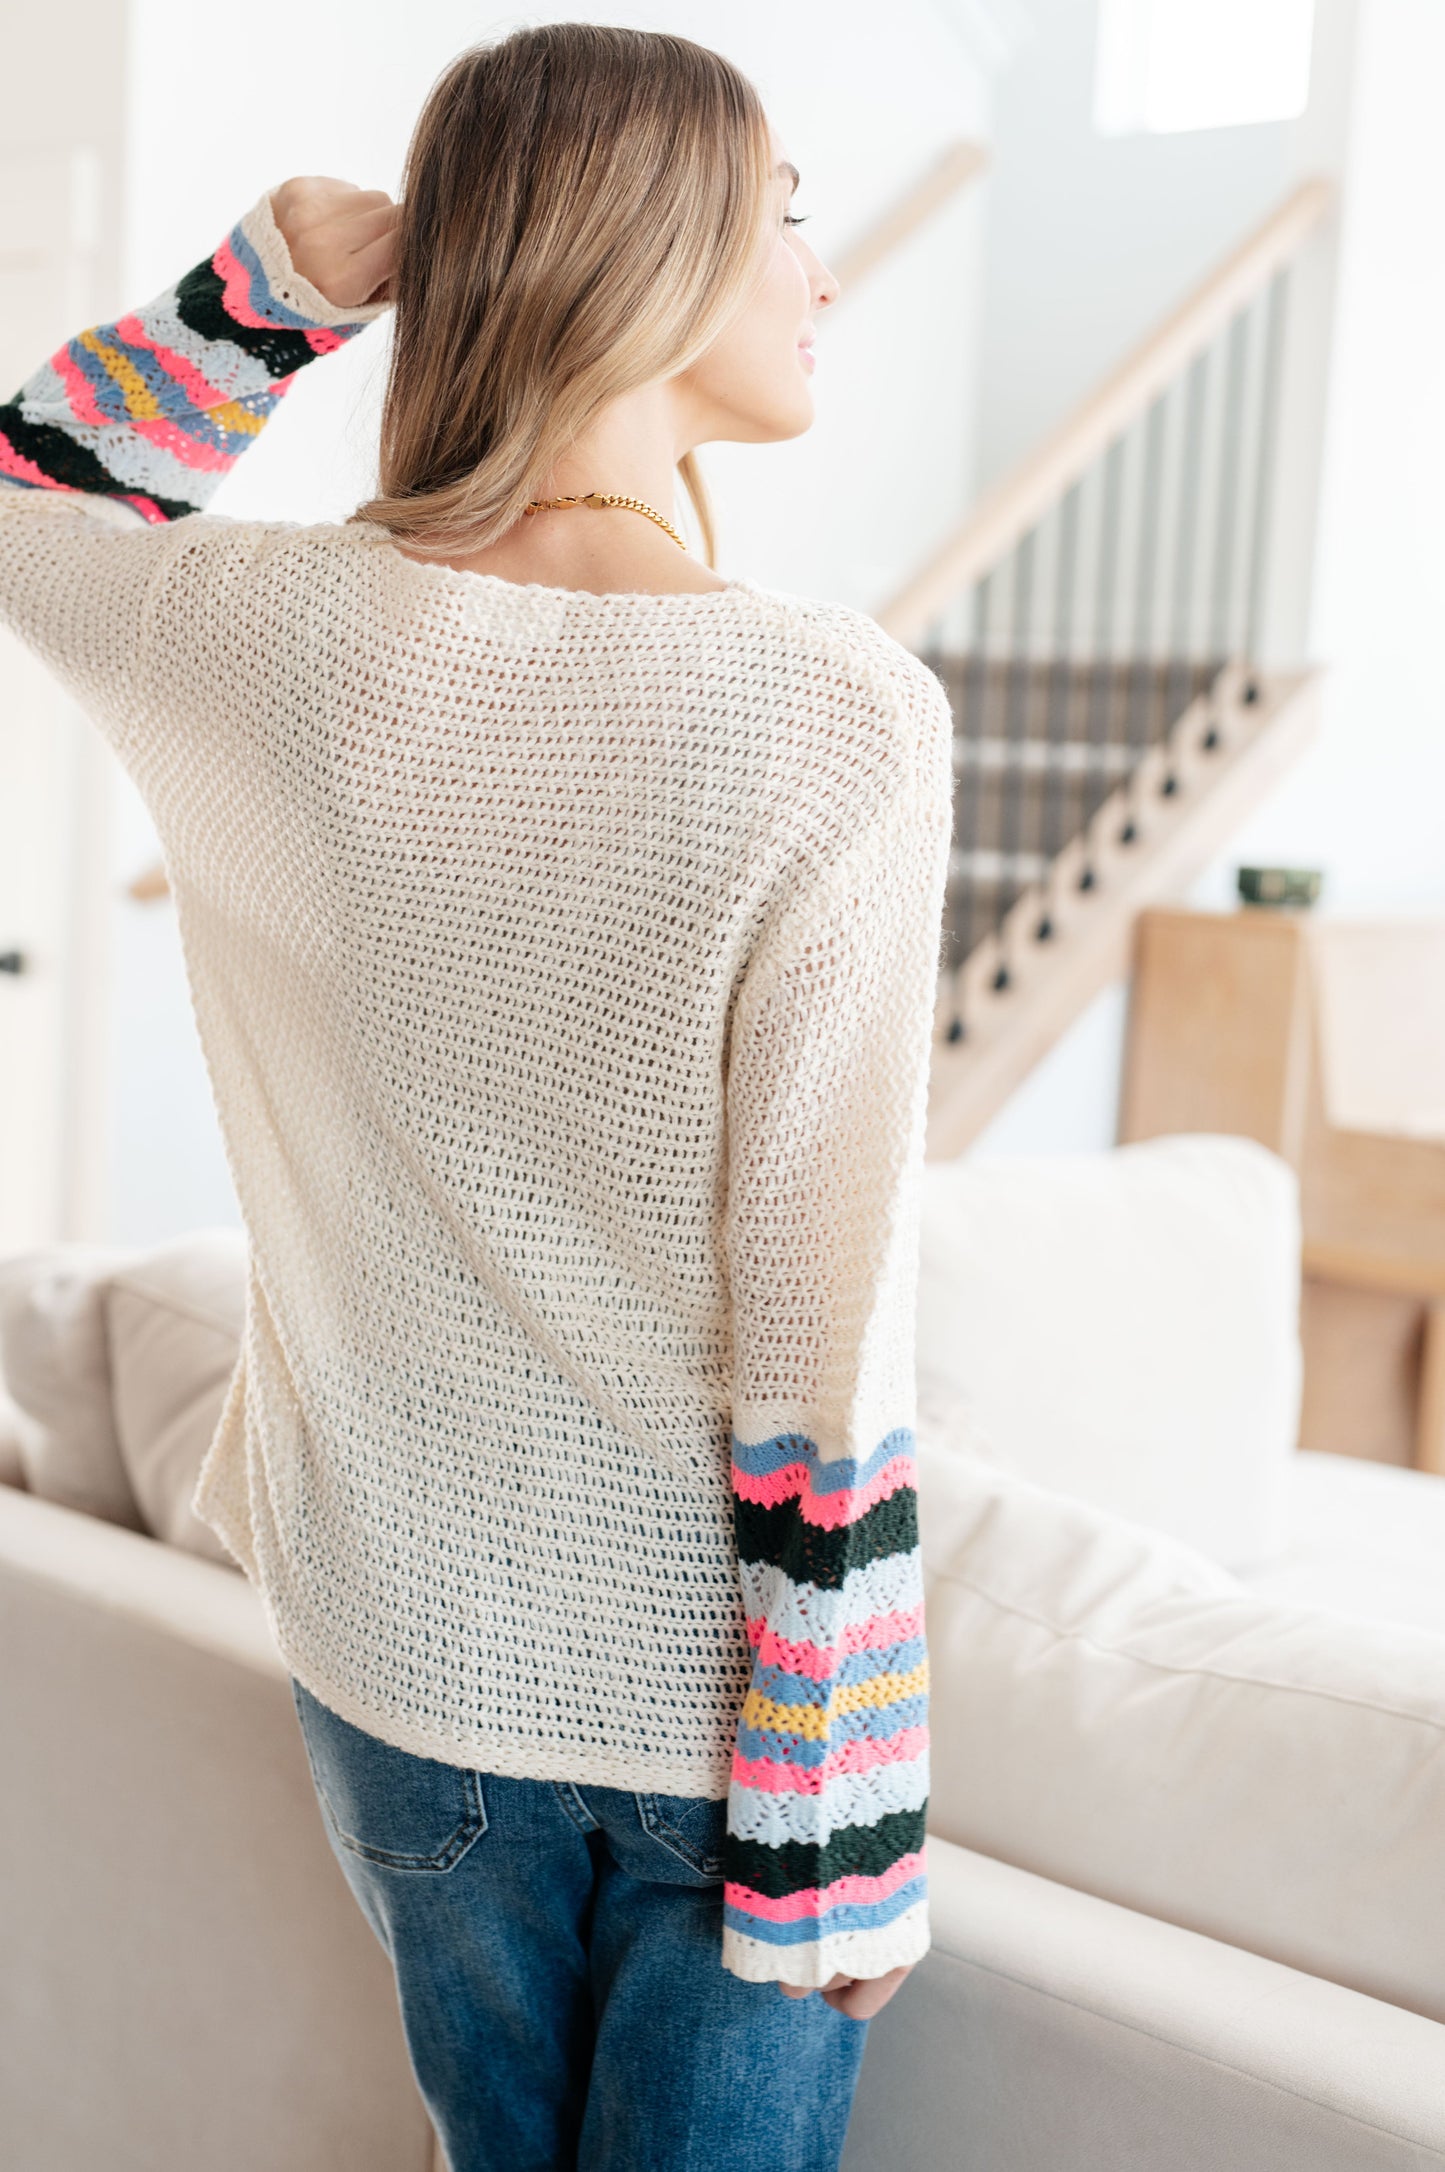 End of the Story Candy Striped Sleeve Sweater